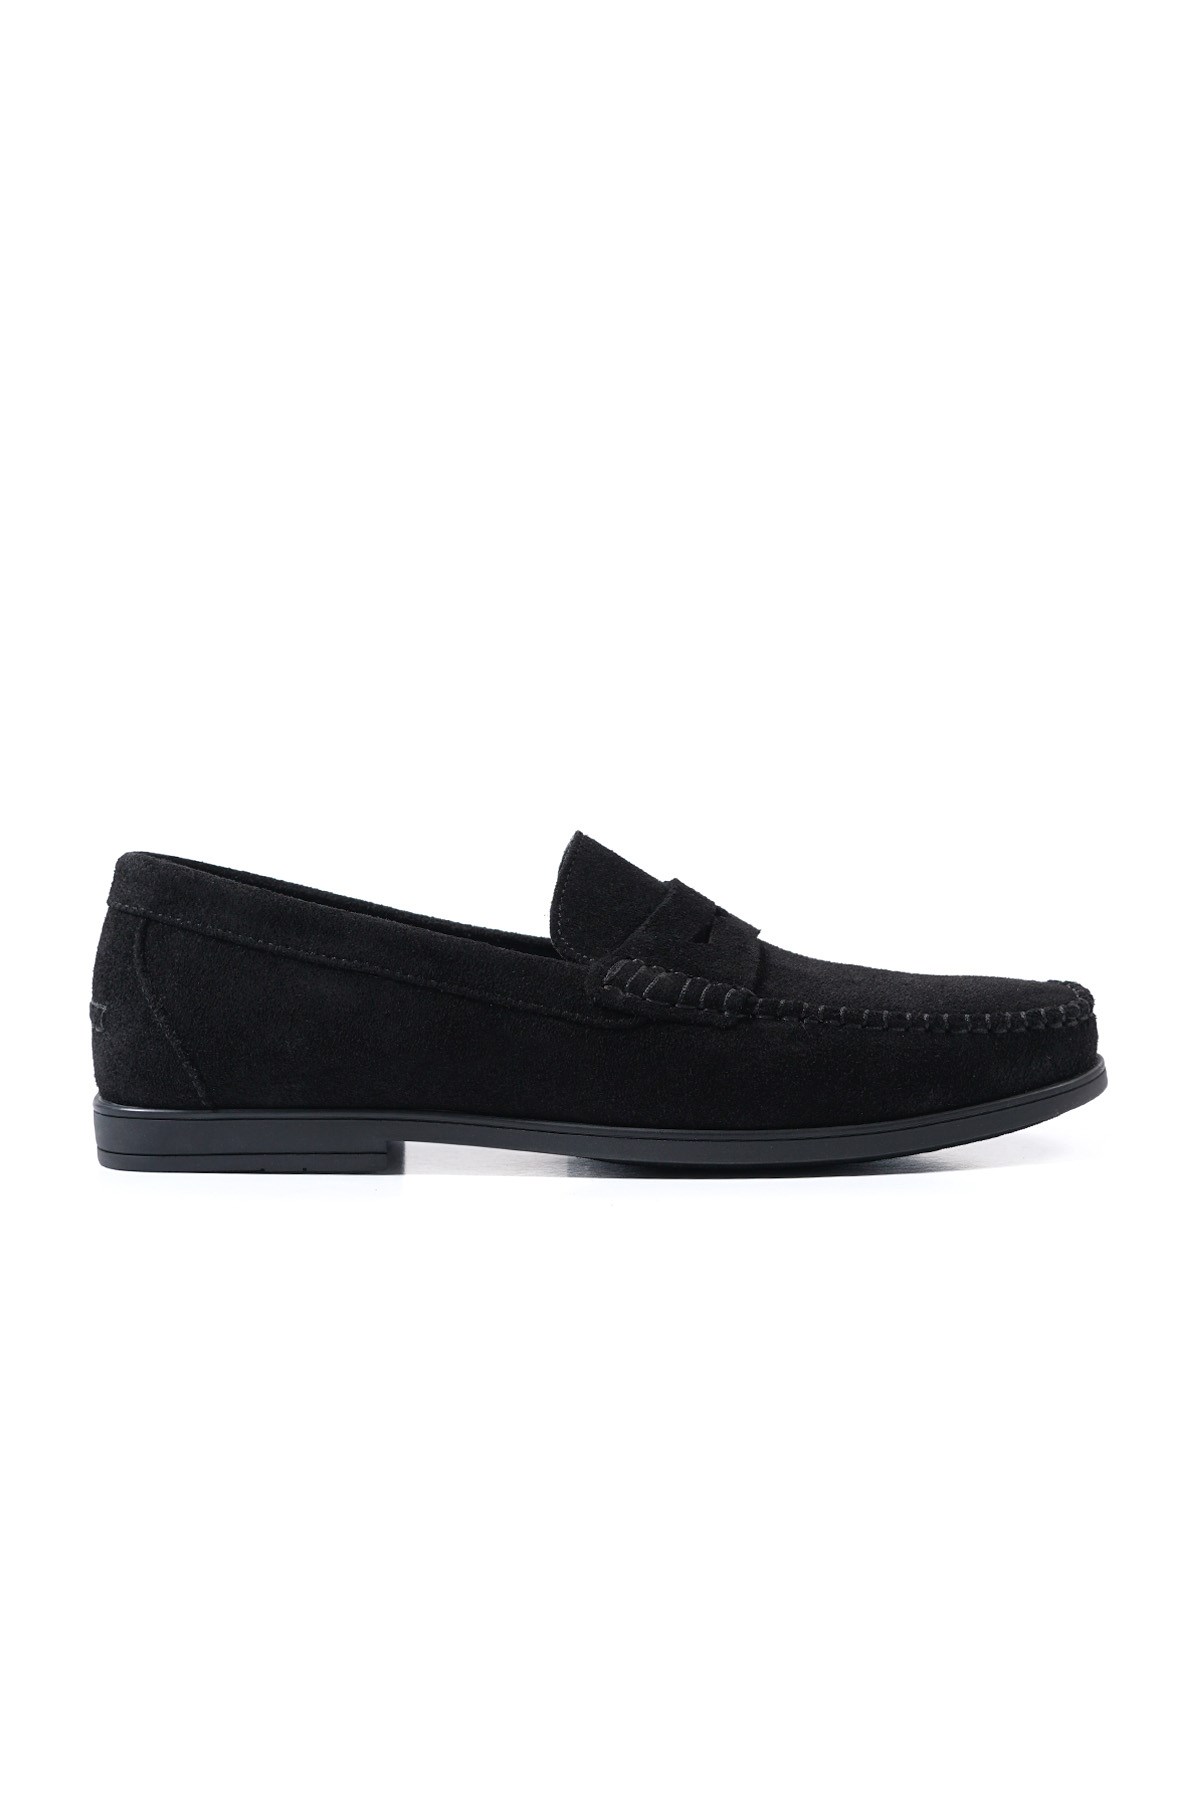 Cordelion Inside Out Black Genuine Suede Leather Laceless Loafer College Men's Shoes